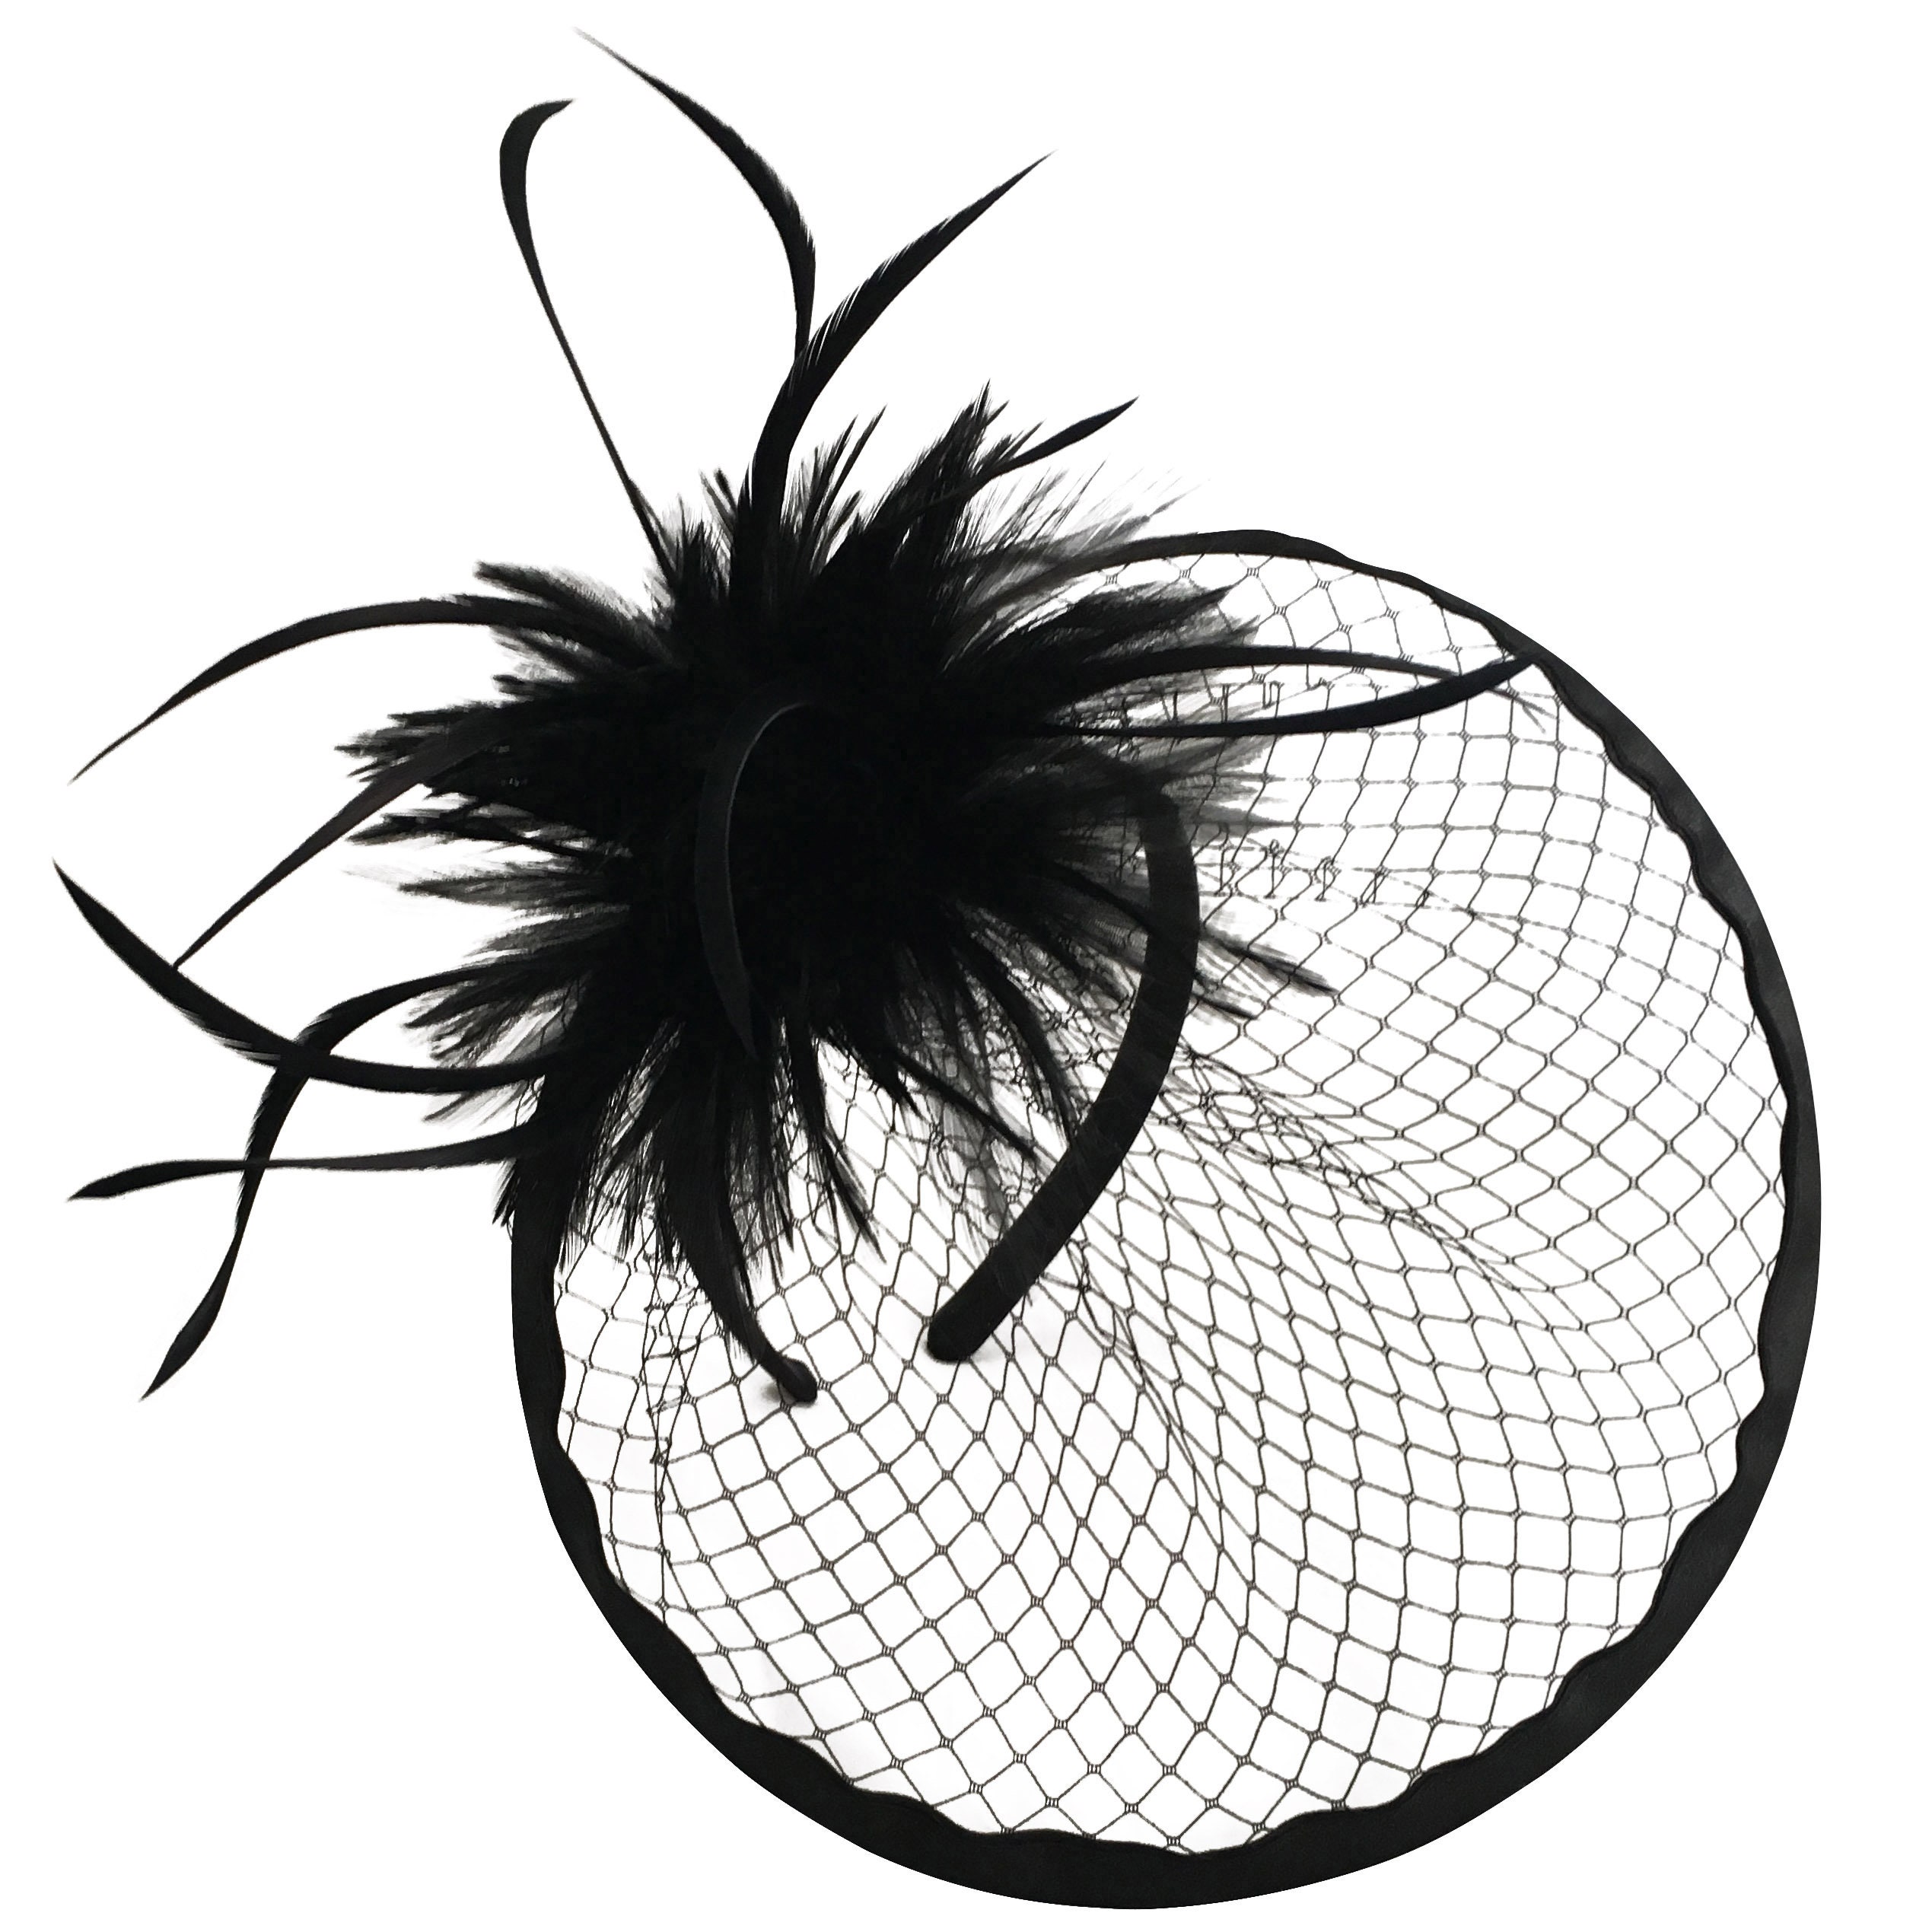 Emmy Black Netted Fascinator With Feather Feature Derby Hat - Etsy